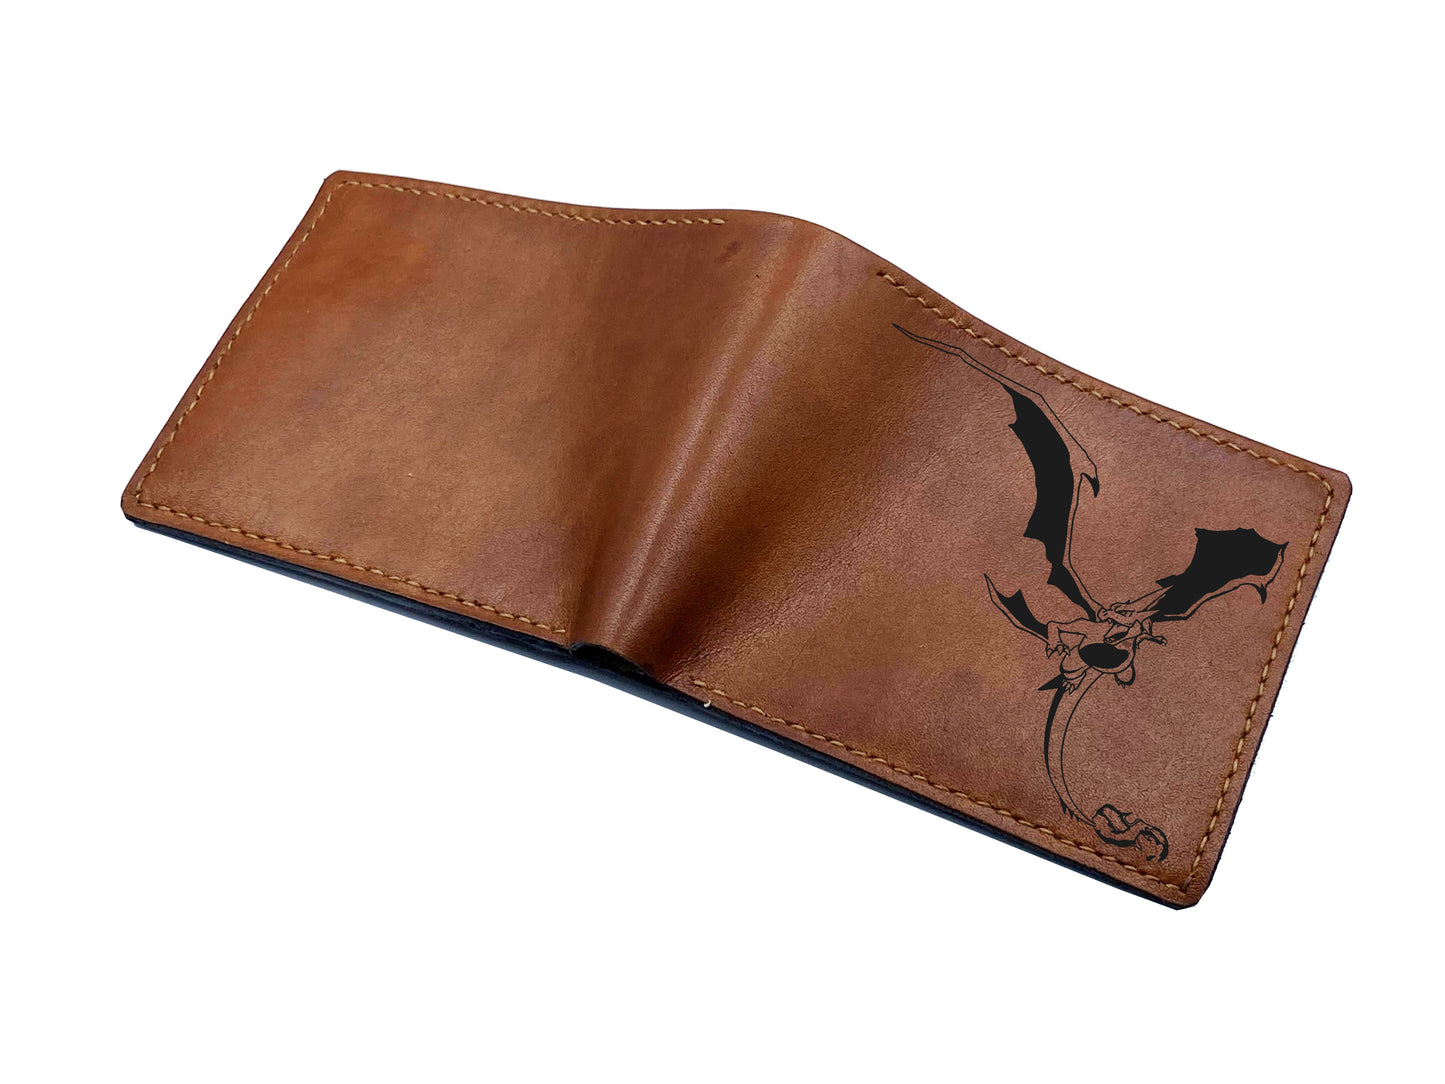 Mayan Corner - Customized leather handmade wallet for men, dragon men's wallet, gift for dad, husband, brother - Charizard mega x pokemon - 3110222